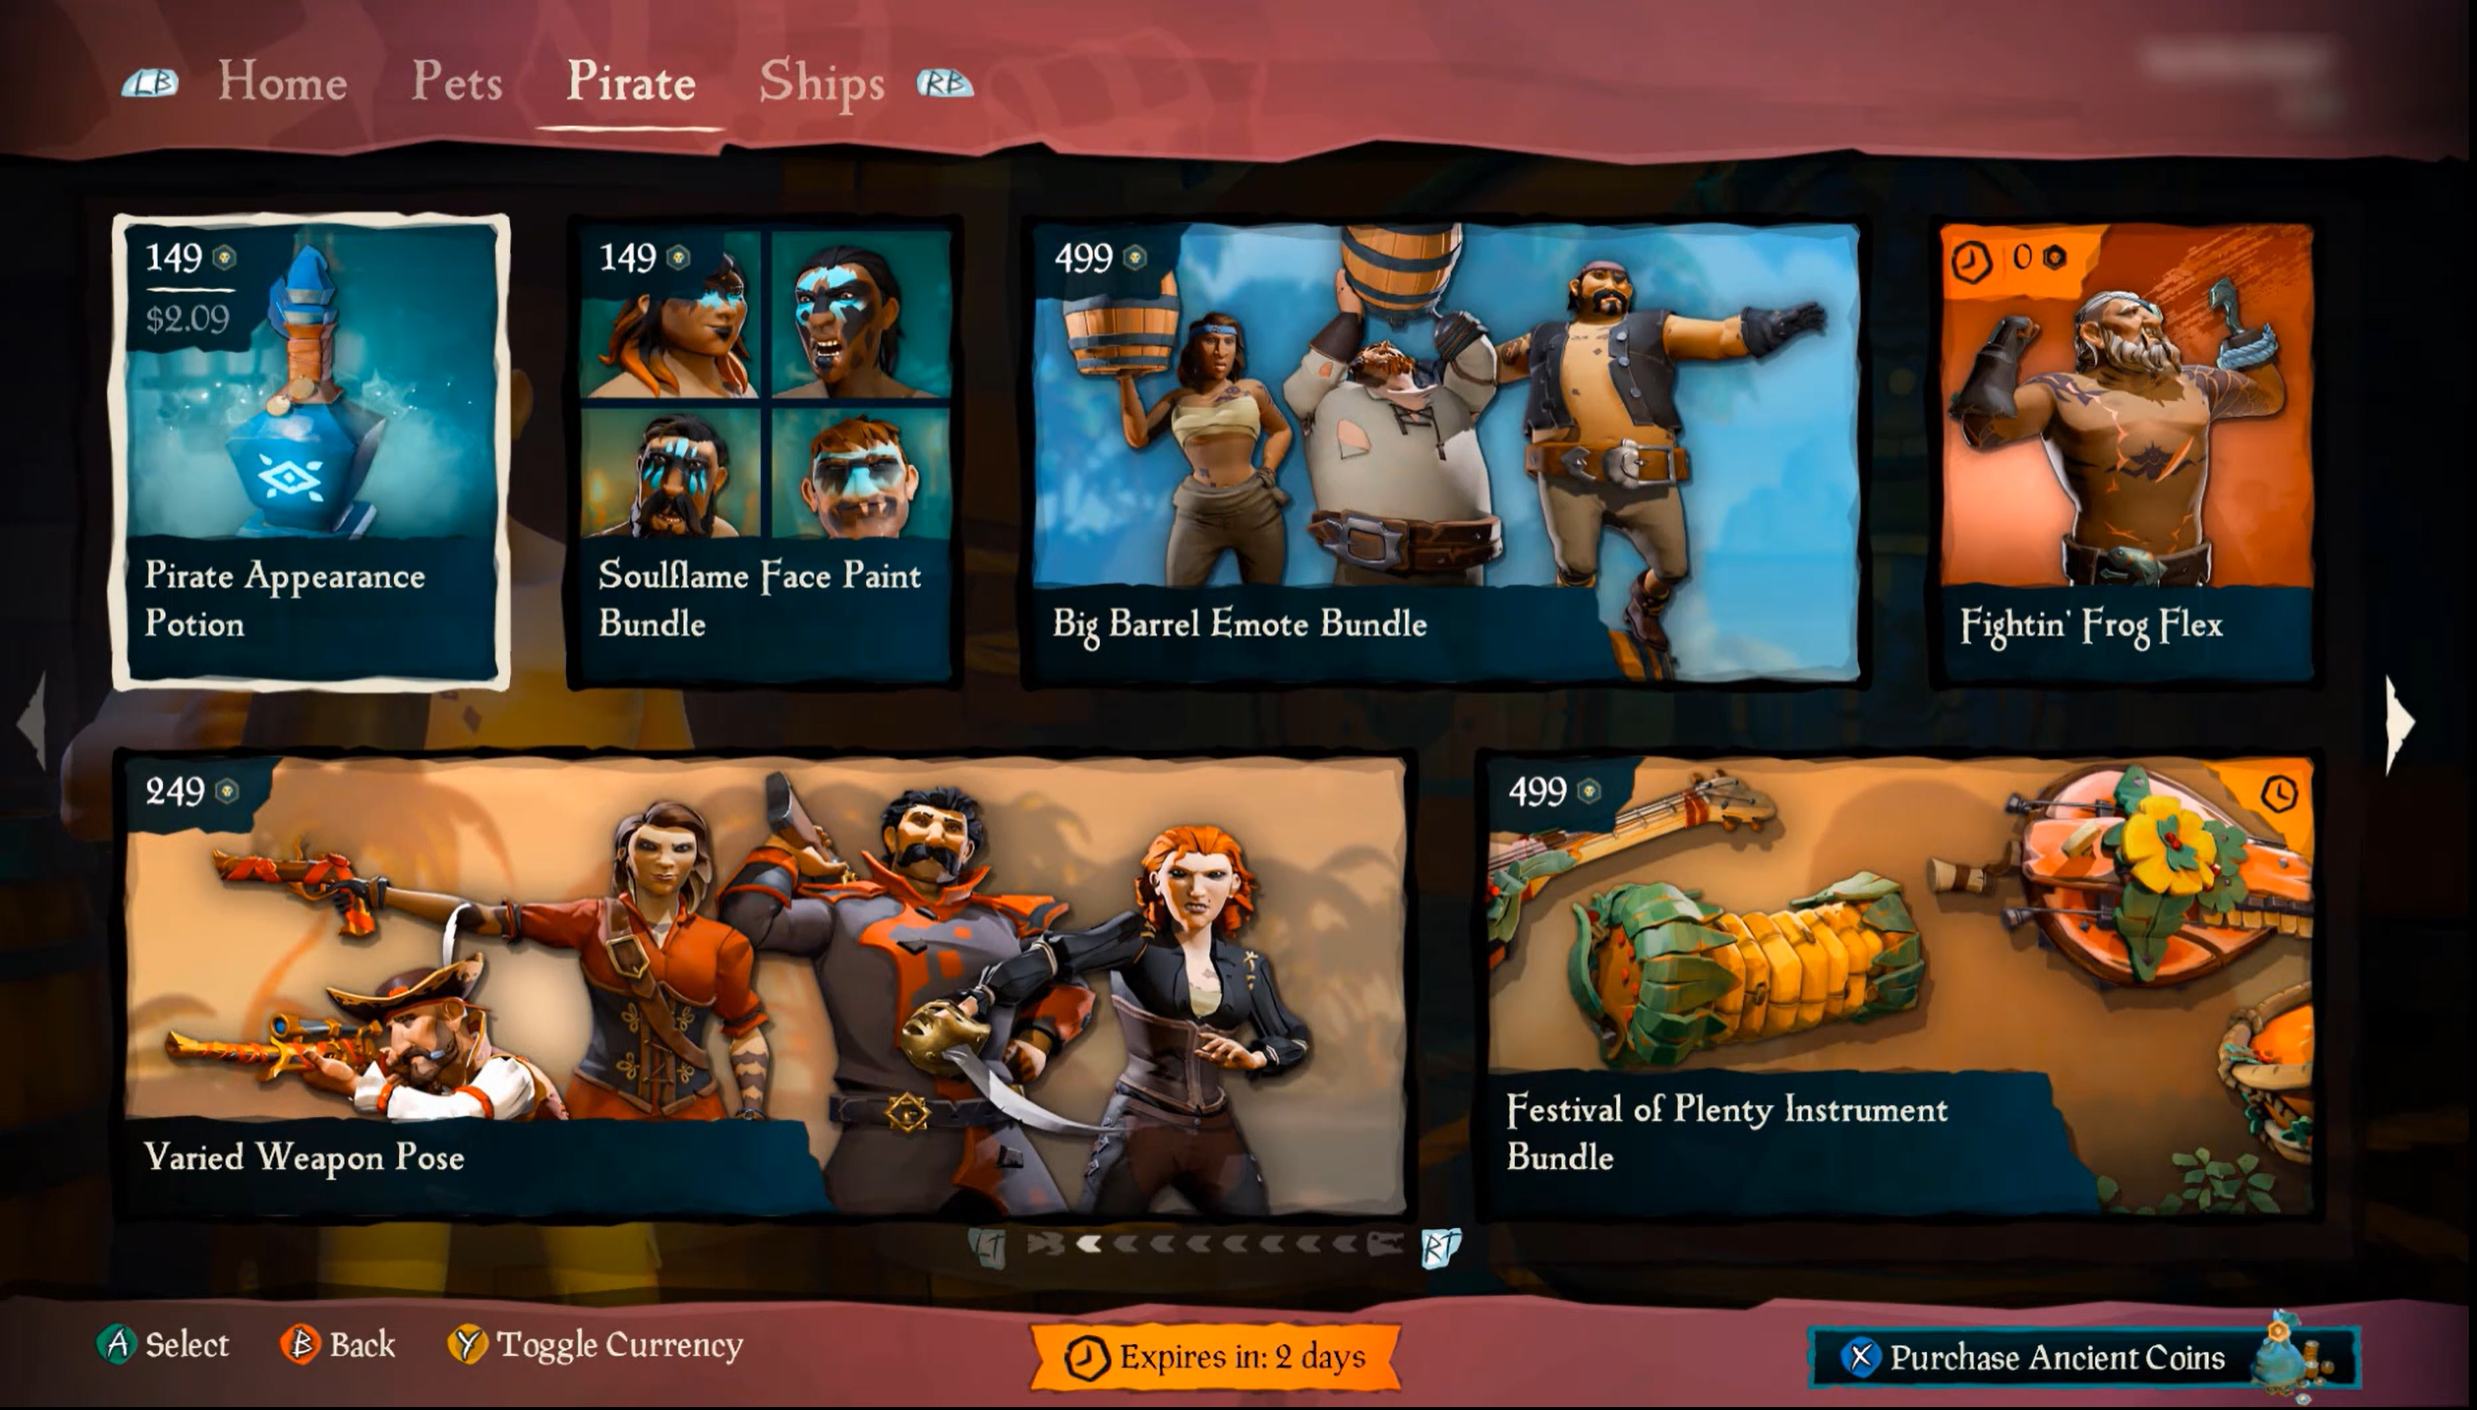 A screenshot from the "Pirate" menu of Sea of Thieves. Two rows of tiles are displayed, showing in-game items that can be purchased for virtual currency.